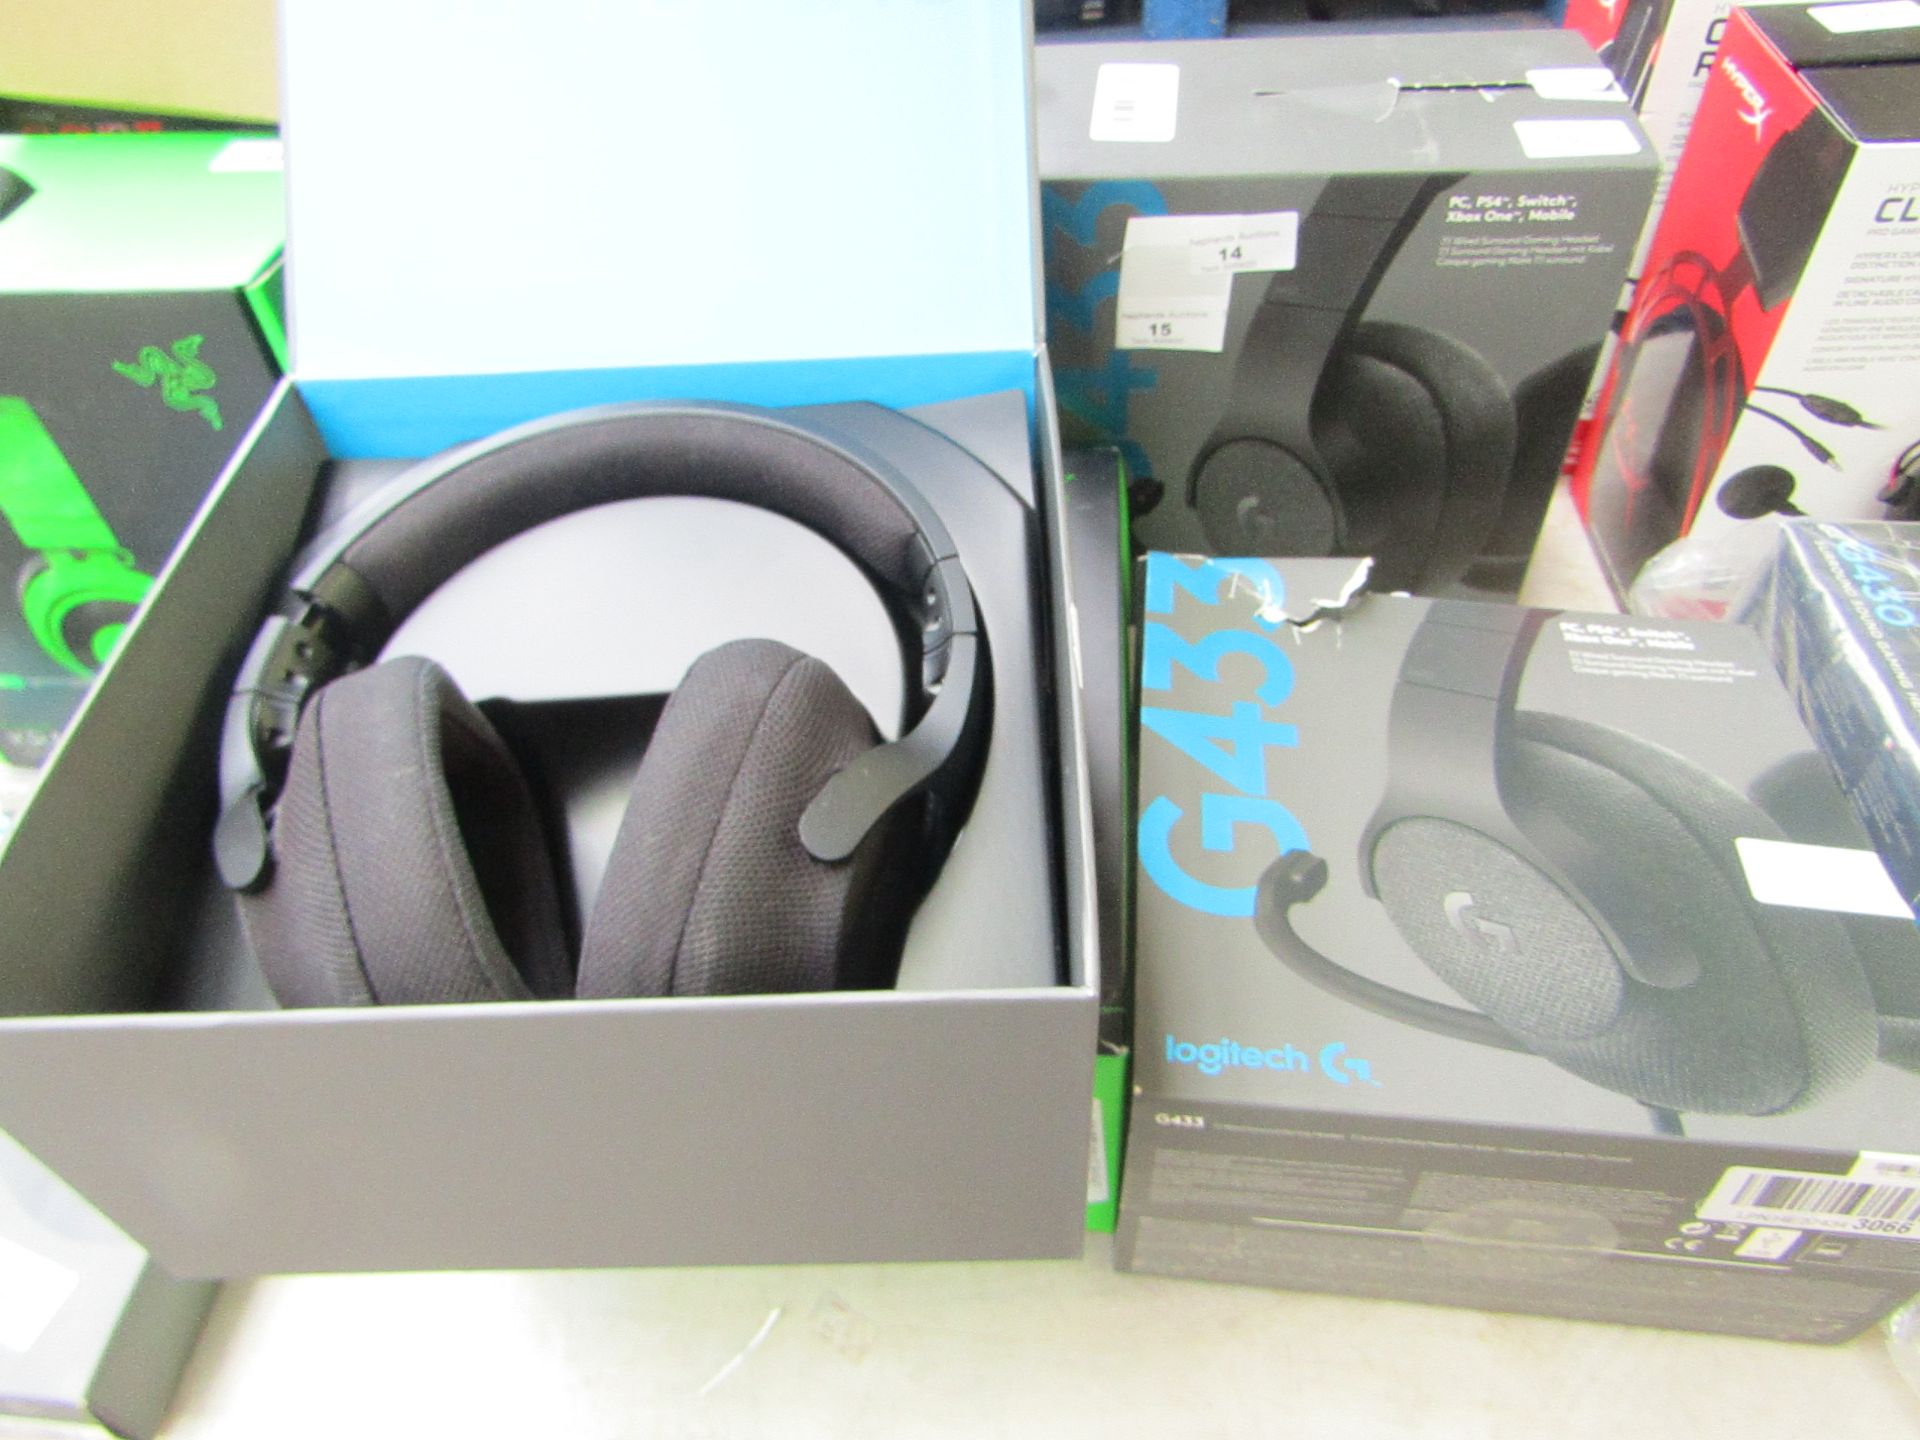 Logitech - G433 - Surround Sound 7.1 Stereo Gaming Headset - Tested Working for sound & Boxed.